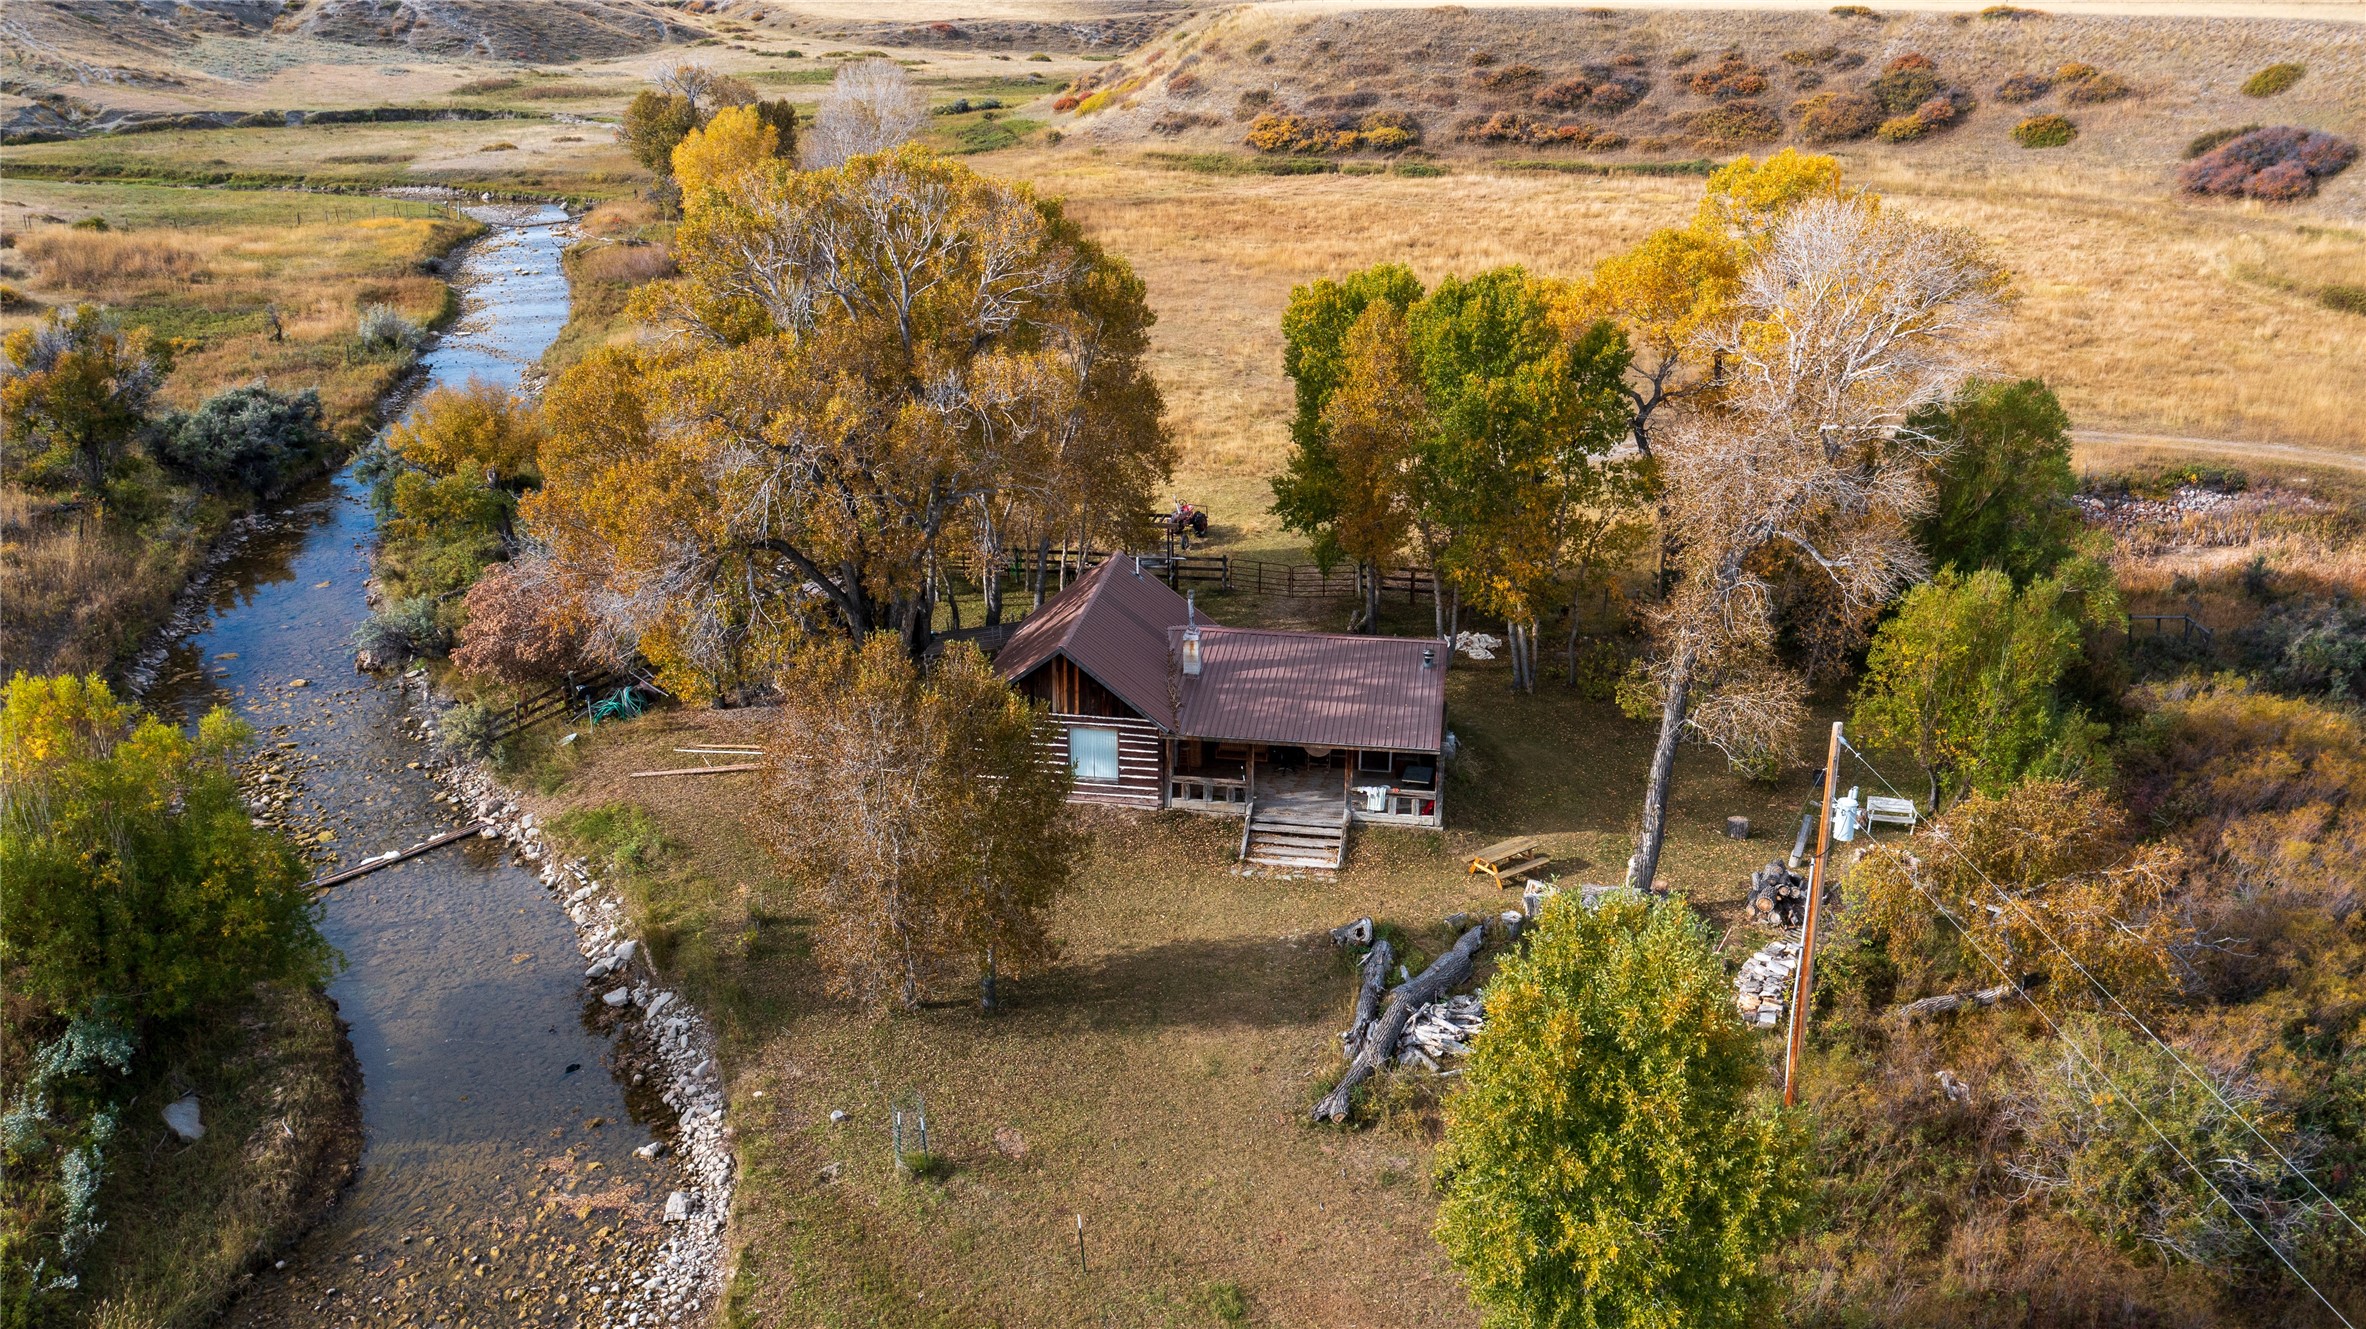 ONE OF A KIND PROPERTY WITH APPROXIMATELY 2000+- FEET OF SUN RIVER FRONTAGE
HAS OLD CABIN (RECONSTRUCTED LOG STAGE STOP) THAT WAS HAULED IN AND REBUILT.
YEAR ROUND WATER AND STREAM/CANAL RUNS DOWN THROUGH PROPERTY FROM WILLOW CREEK RESERVOIR
BACKS UP TO +- 6 SECTIONS OF BLM LAND THAT EXTENDS ALL THE WAY TO WILLOW CREEK RESERVOIR AND APPROXIMATELY +- 2 SECTIONS OF STATE LAND.  
PROPERTY ON THE SOUTH BOUNDARY AND THE PROPERTY ON THE NORTH BOUNDARY ARE BOTH IN CONSERVATION EASEMENTS.
OUTSTANDING VIEWS FROM THE HIGH GROUND AND RARELY DOES A PROPERTY LIKE THIS COME ON THE MARKET.  SHOWCASE PROPERTY WITH OUTSTANDING IMPROVEMENT POTENTIAL.  EXCELLENT PASTURE FOR HORSE OR COWS. CALL CHARLES TAYLOR AT 406-899-0864 OR YOUR REAL ESTATE PROFESSIONAL.